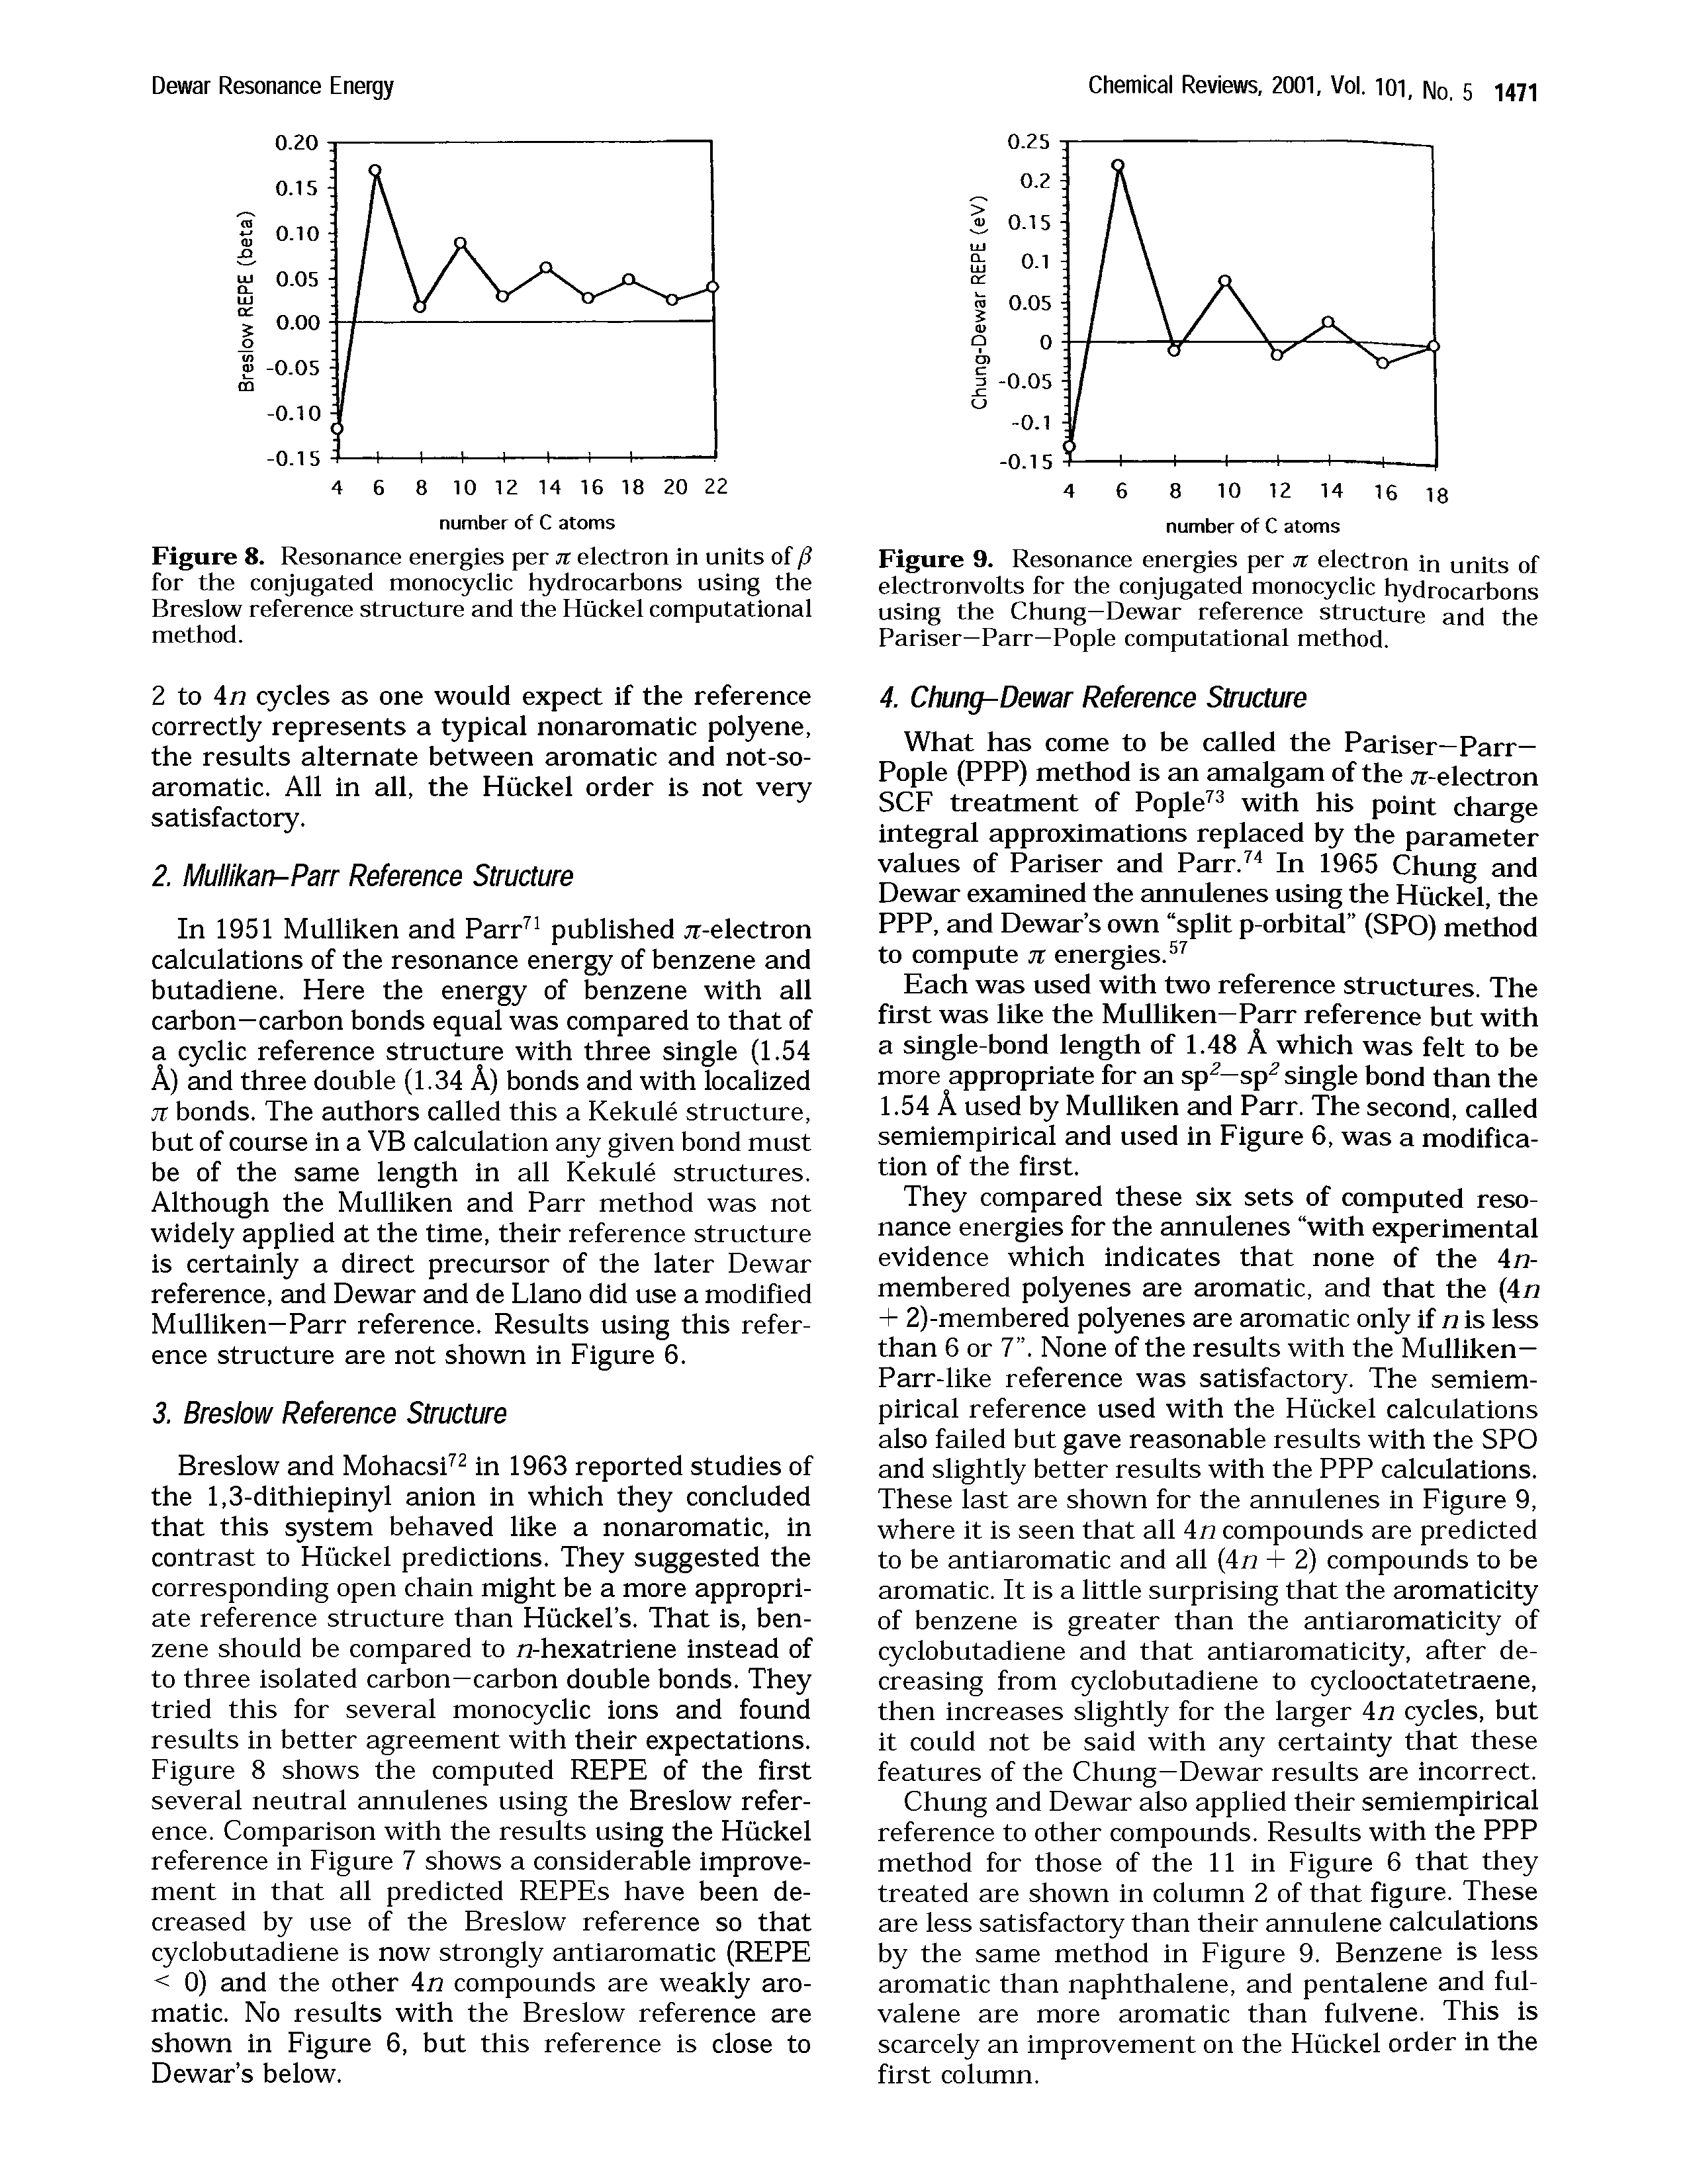 Figure 9. Resonance energies per jt electron in units of electronvolts for the conjugated monocyclic hydrocarbons using the Chung—Dewar reference structure and the Pariser—Parr—Pople computational method.